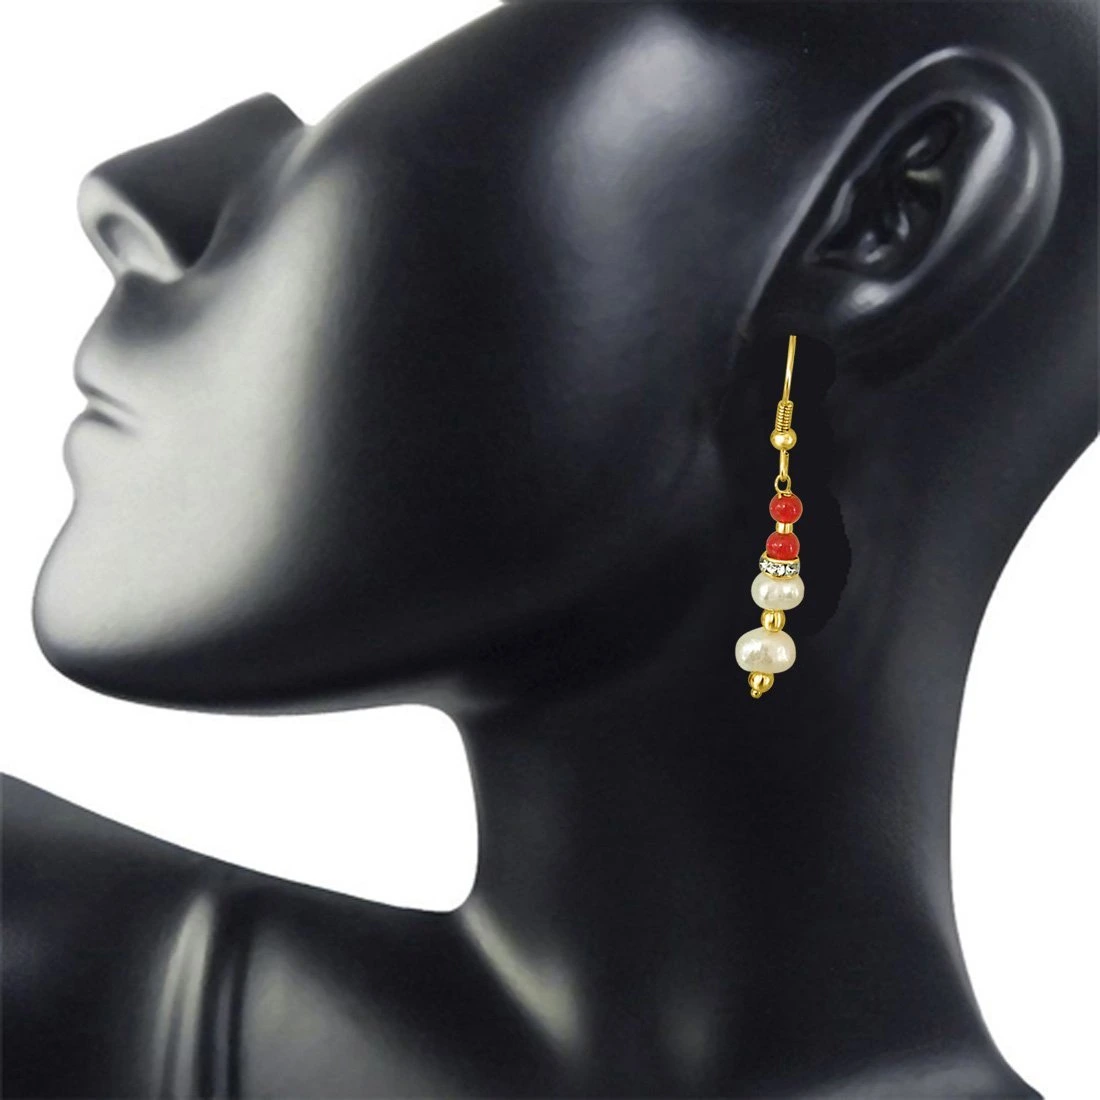 Real Pearl & Red Coloured Stone Hanging Earrings